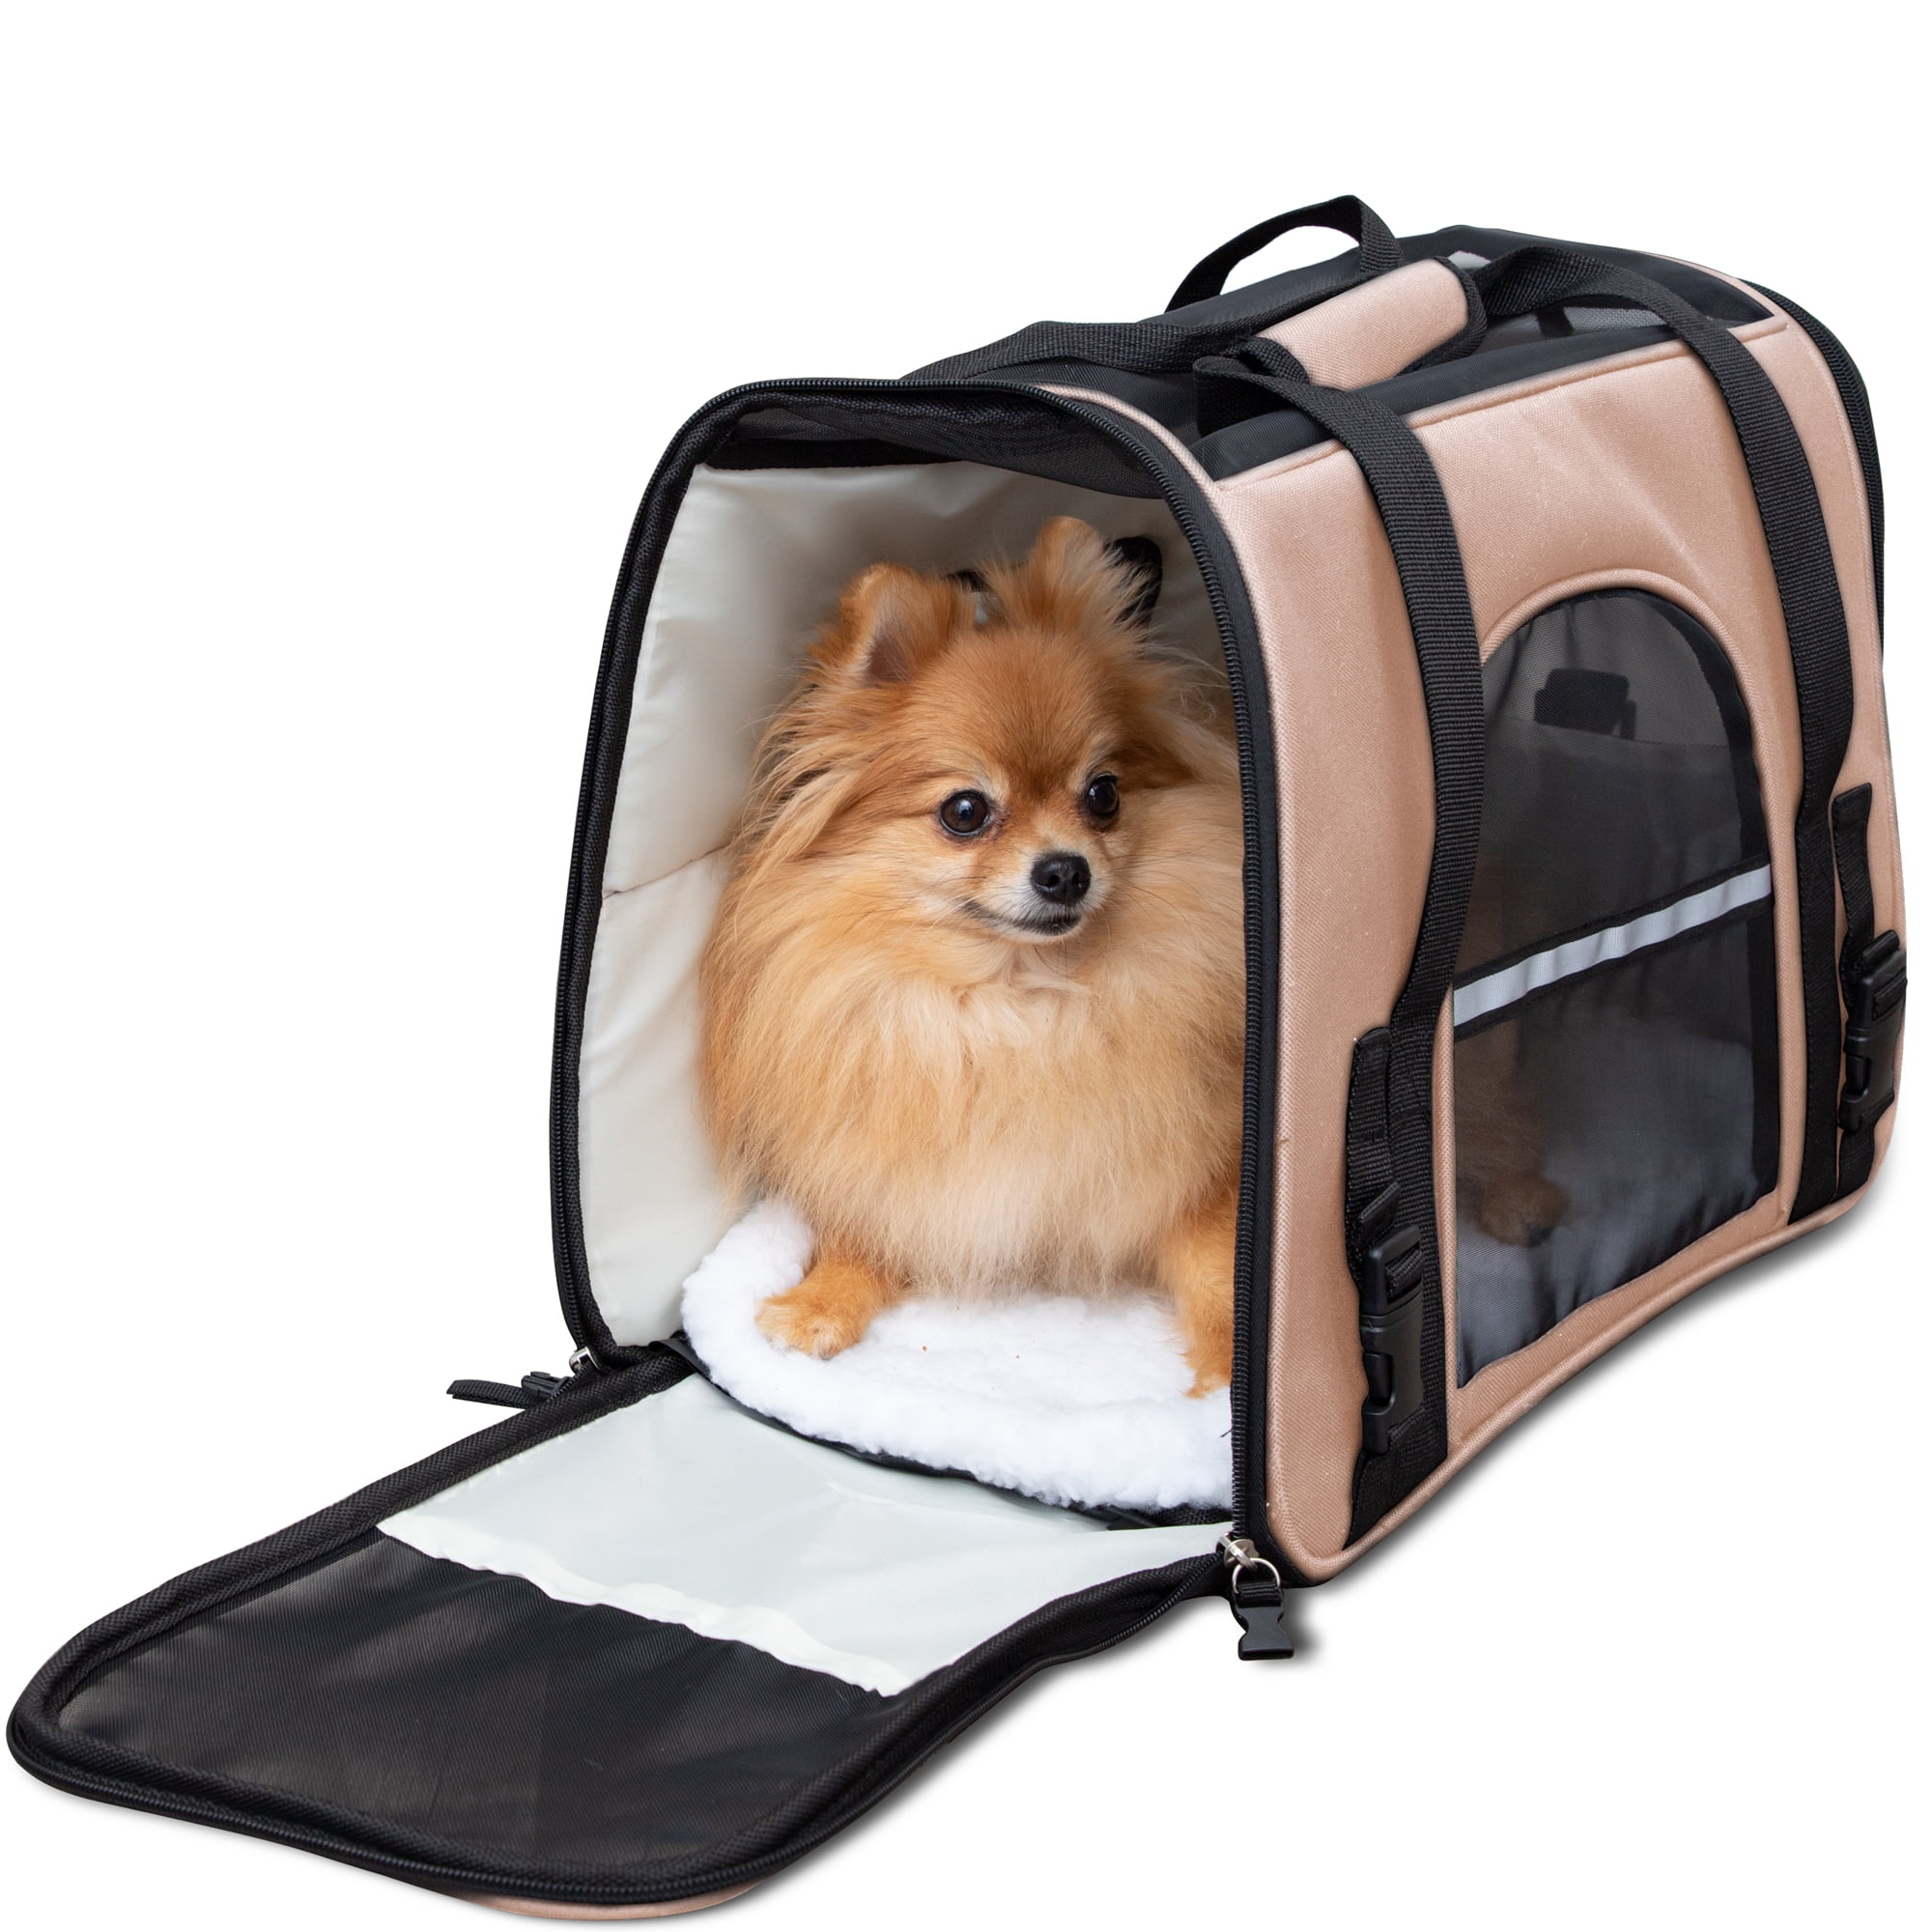 Best for Small Medium Cats Dogs Airline Approved Dog Carrier with Mesh Window Breathable Collapsible,Soft-Sided,Escape Proof,Easy Storage NAT Dog Carrier Cat Carrier Pet Carrier 